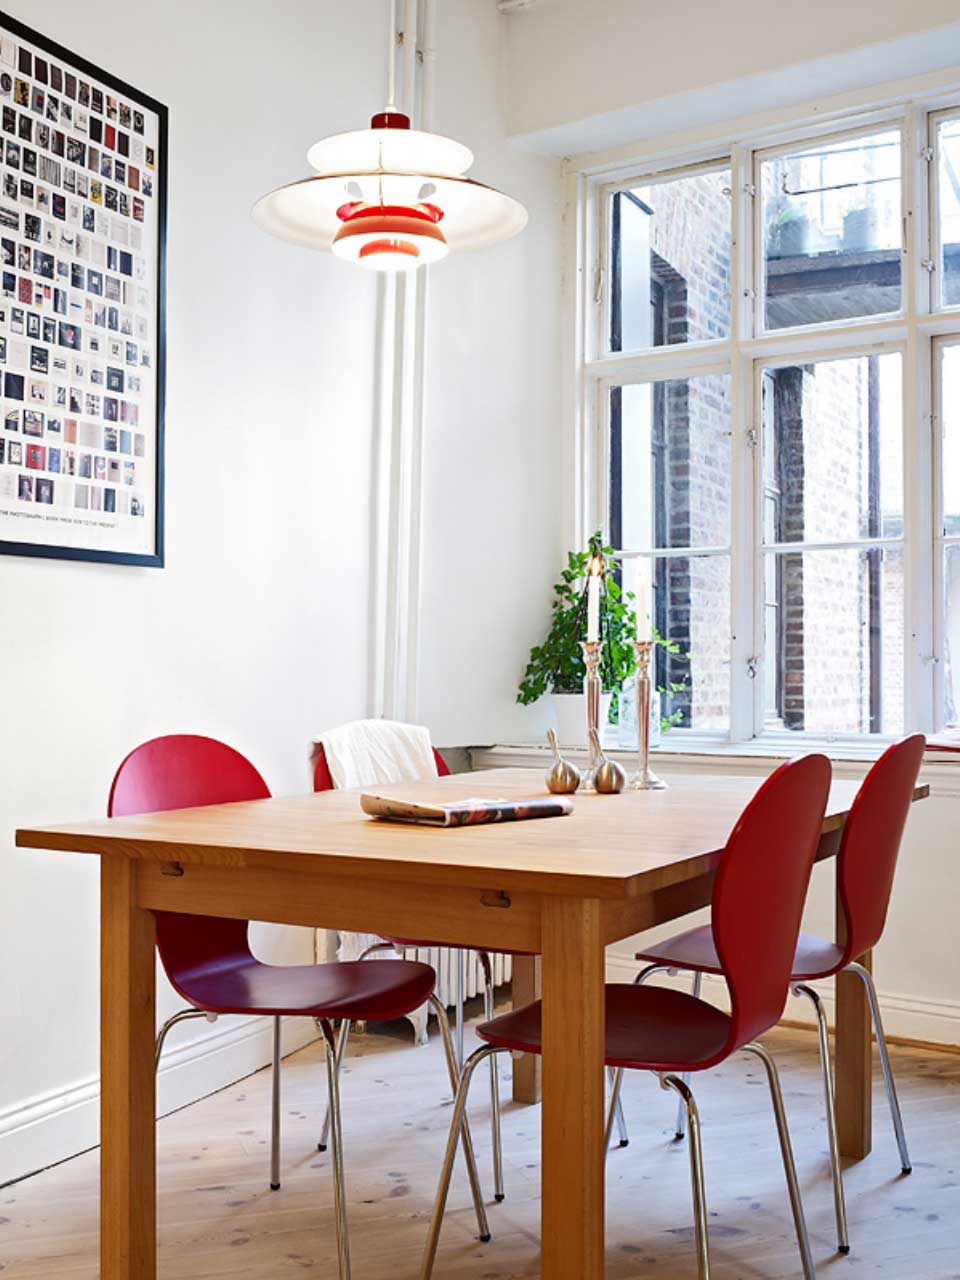 Dining Room Small Attractive Dining Room Ideas For Small Home Design With Natural Square Wooden Dining Table Idea And Modern Red Molded Chairs Design Also Luxurious Pendant Light Ideas Dining Room The Best Simple Dining Room Ideas